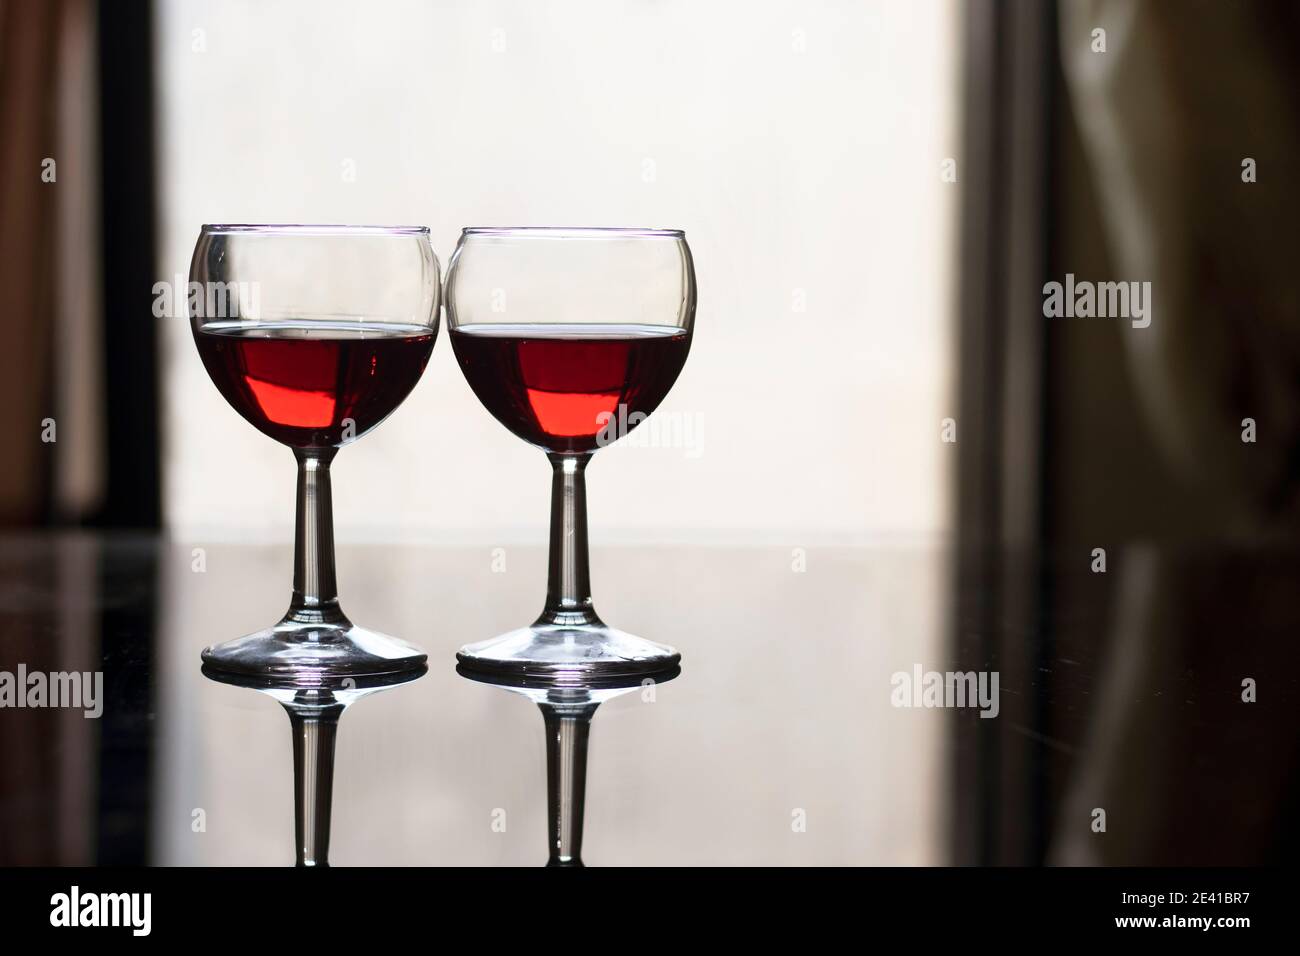 Red wine in various glass wares Stock Photo